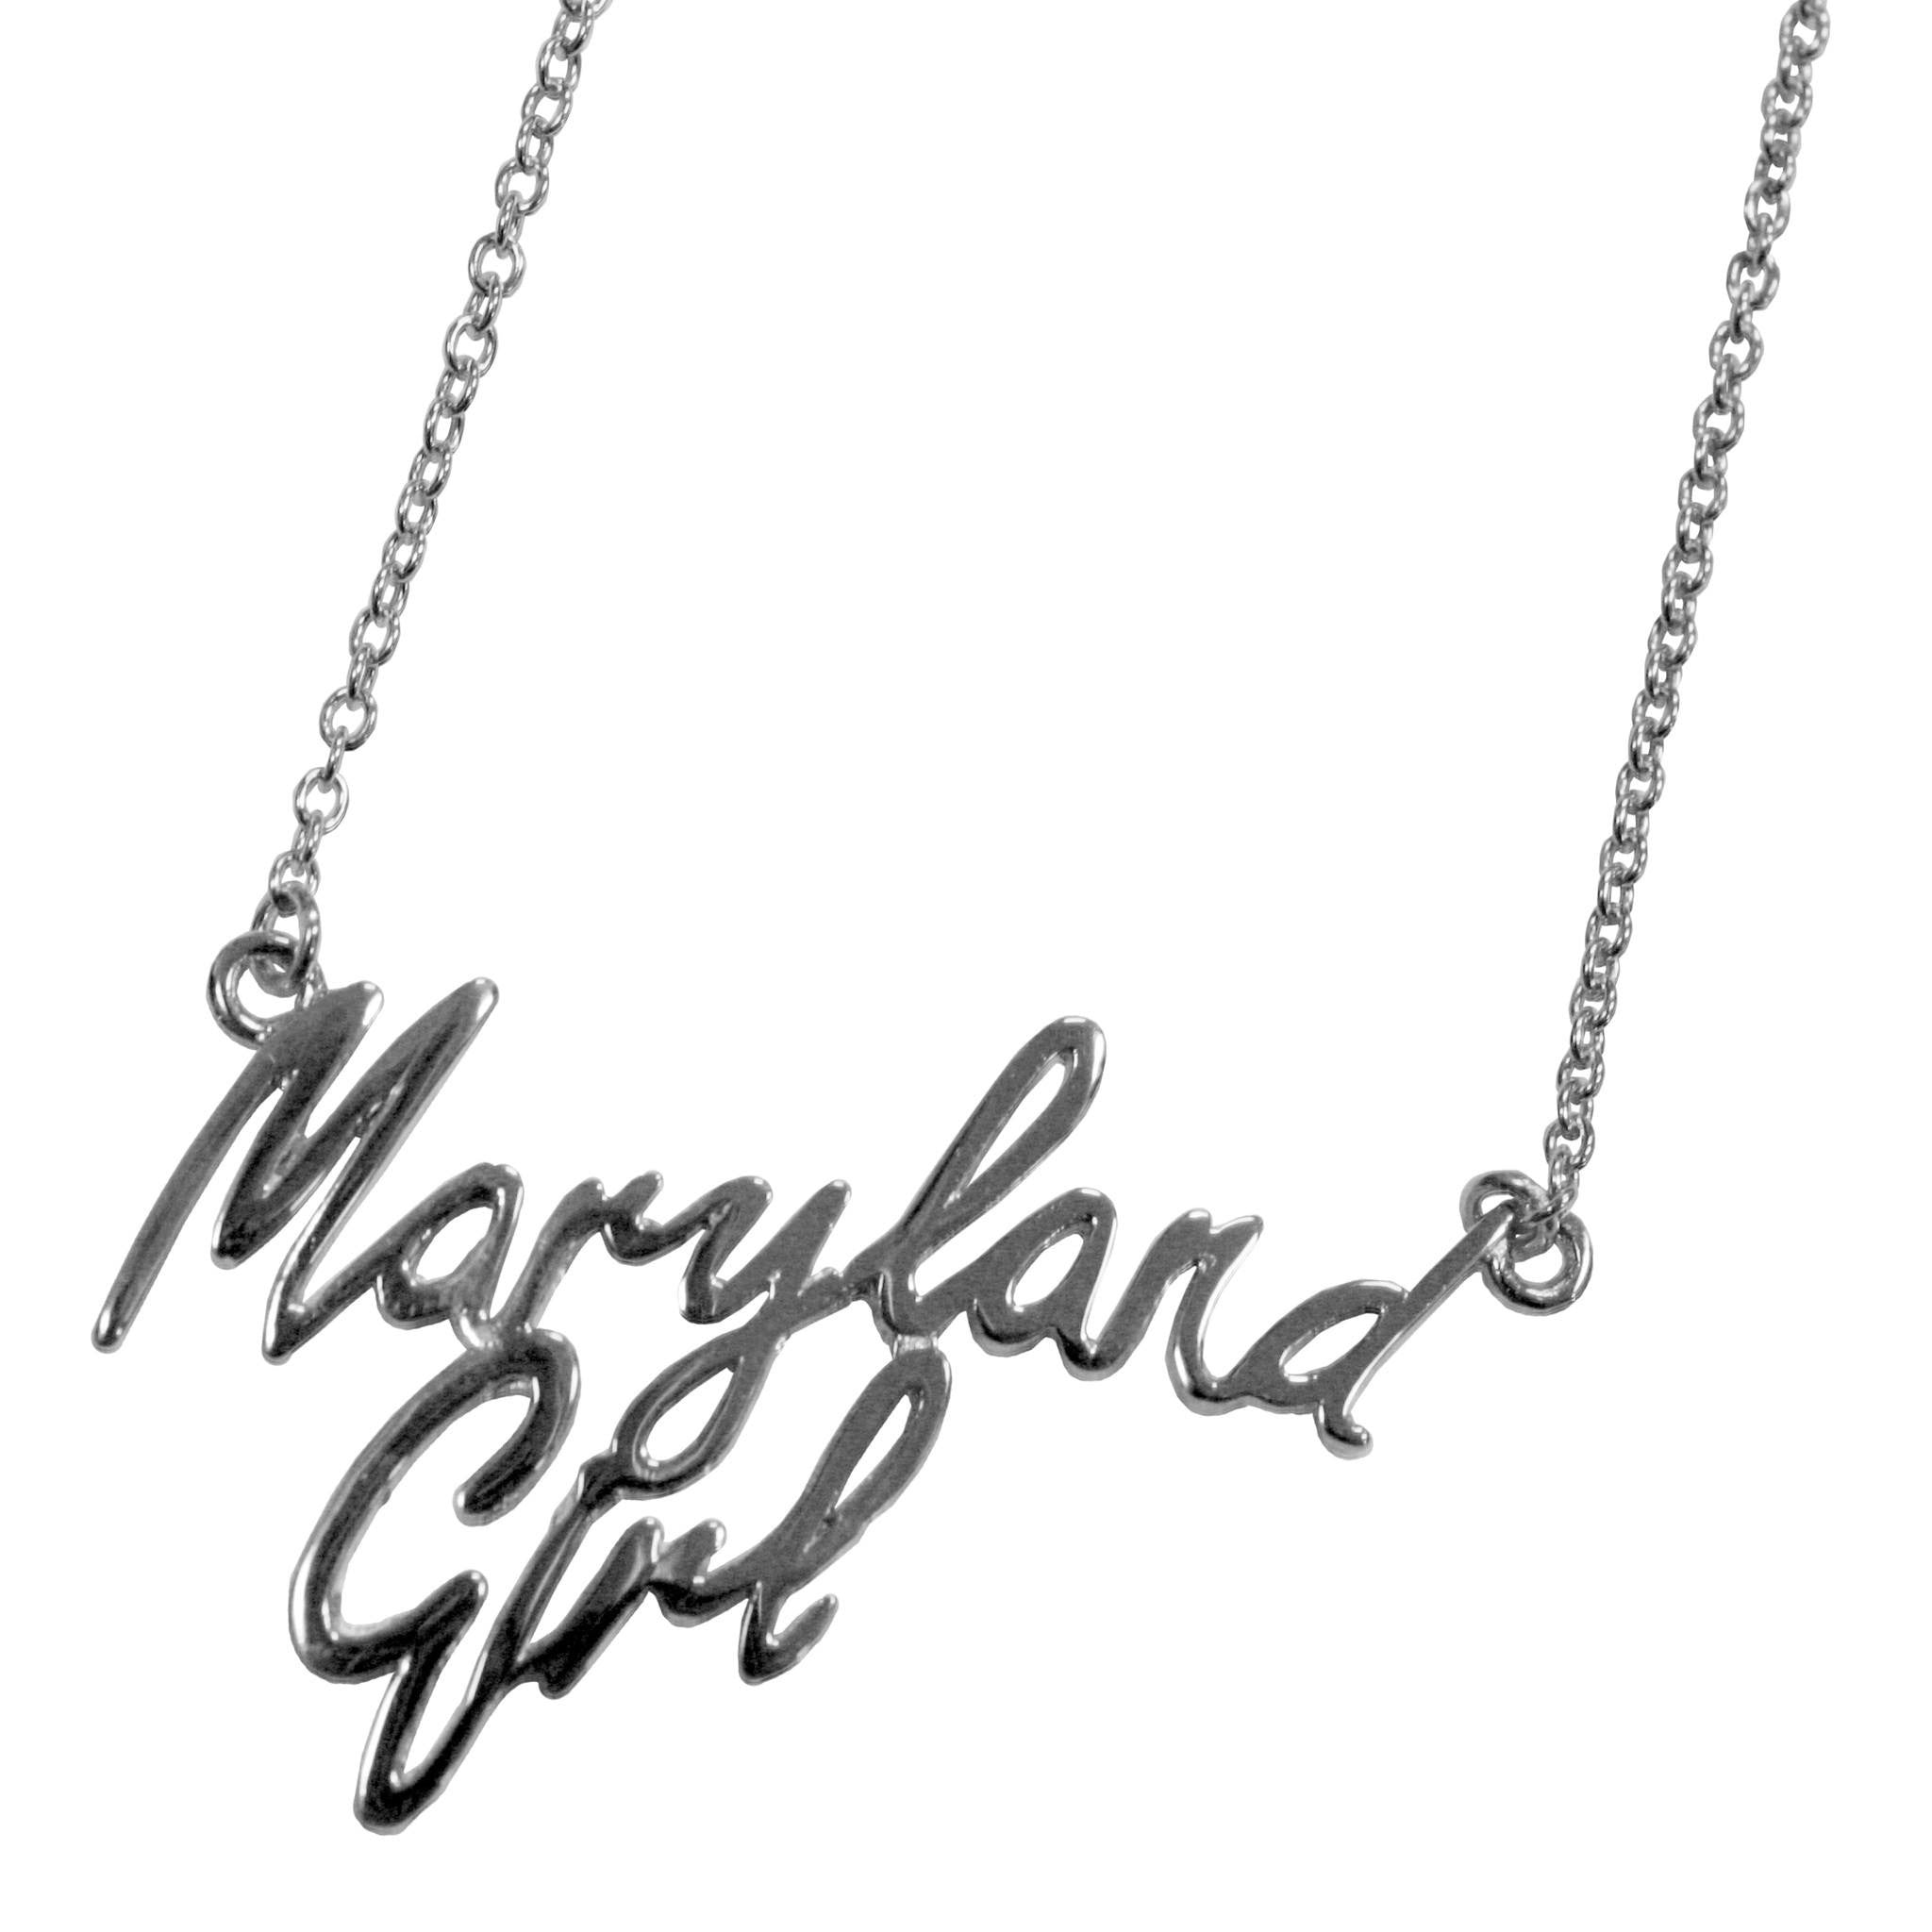 Maryland Girl (Sterling Silver) / Necklace - Route One Apparel